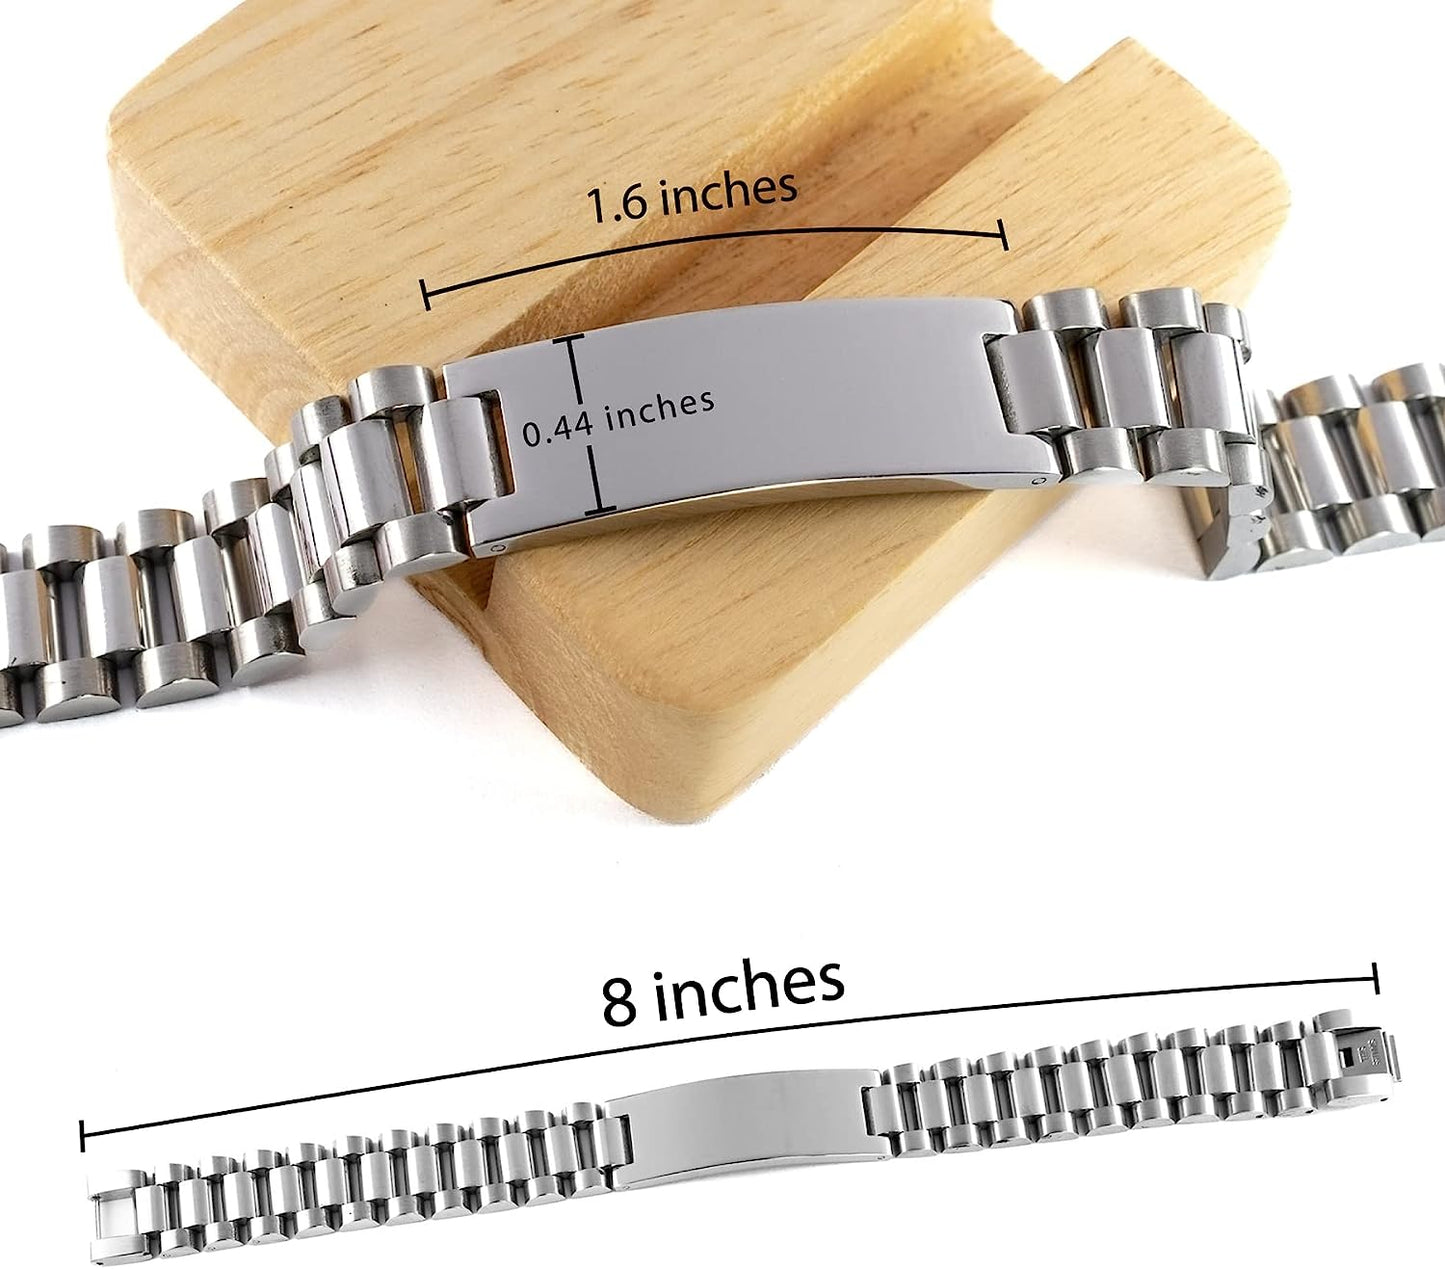 Inappropriate Puzzles Ladder Bracelet, Eat. Sleep. Puzzles. Repeat, Present For Men Women, Useful Gifts From Friends, Puzzles for adults, Brain teasers, Jigsaw puzzles, Wooden puzzles, D puzzles,